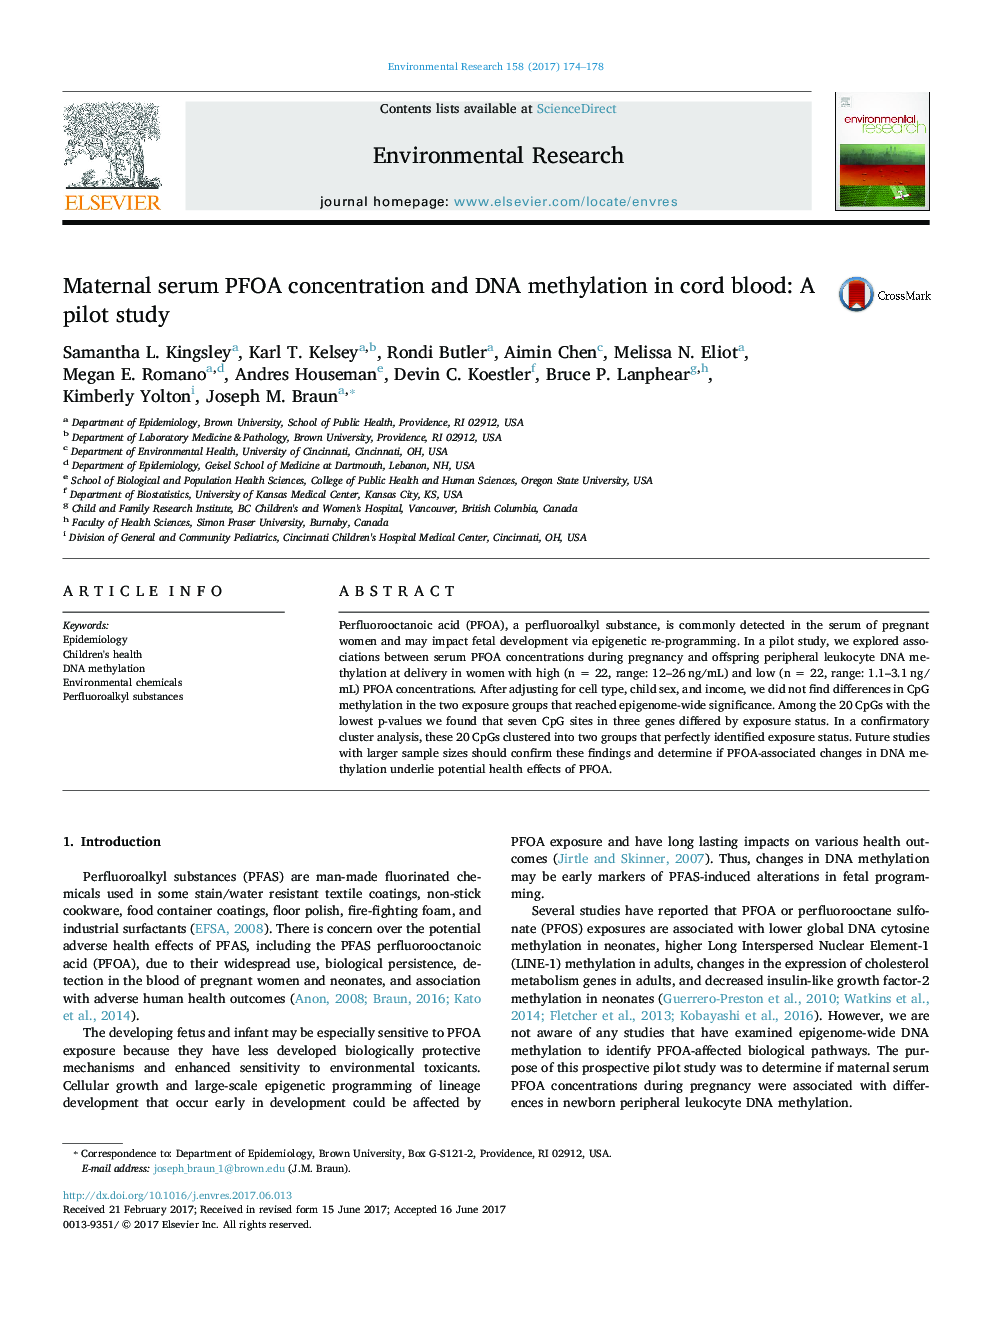 Maternal serum PFOA concentration and DNA methylation in cord blood: A pilot study